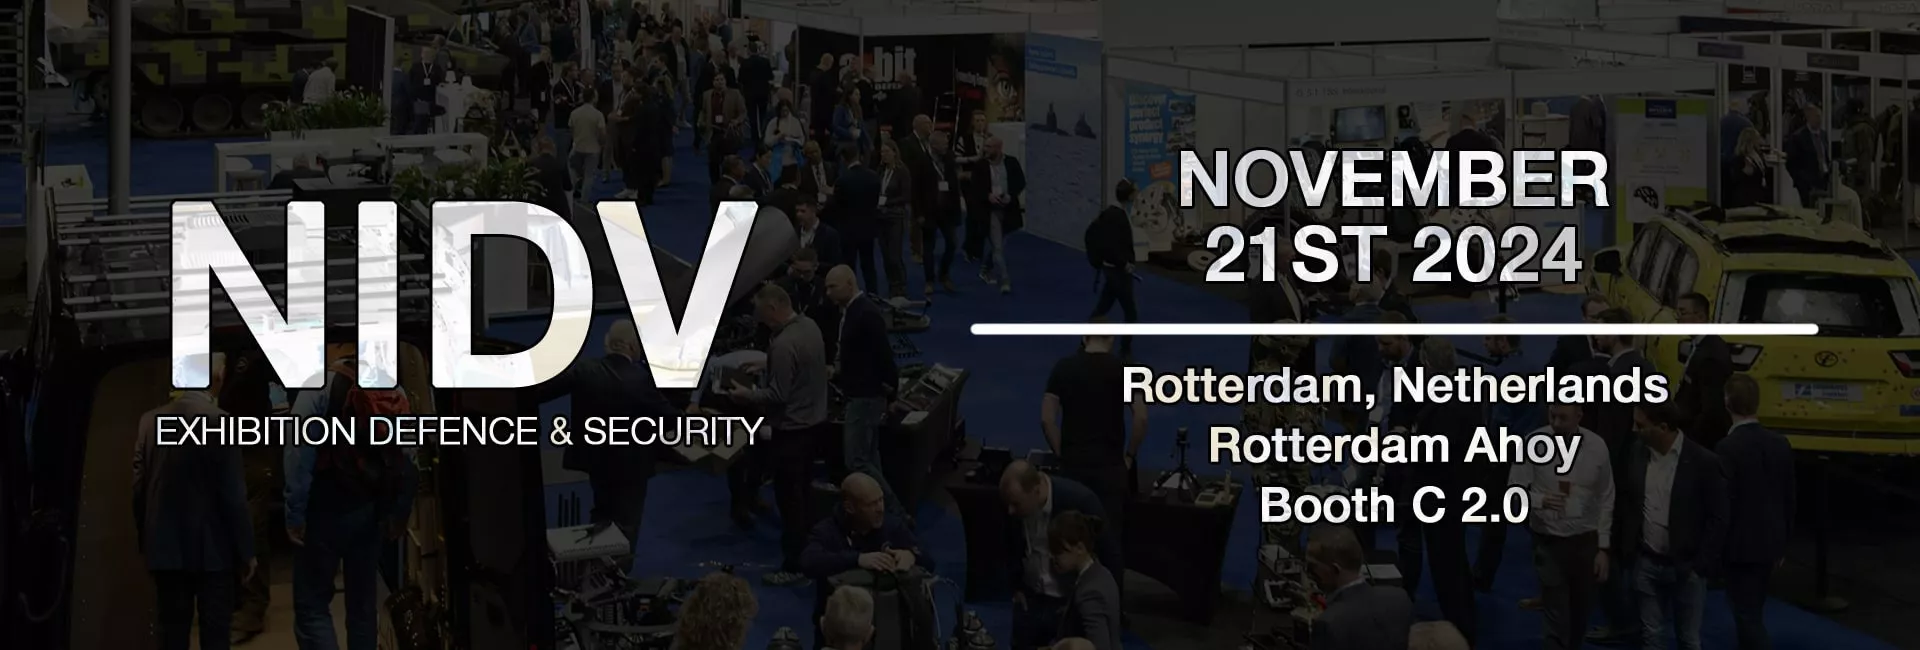 NIDV Exhibition Defence and Security 2024 banner